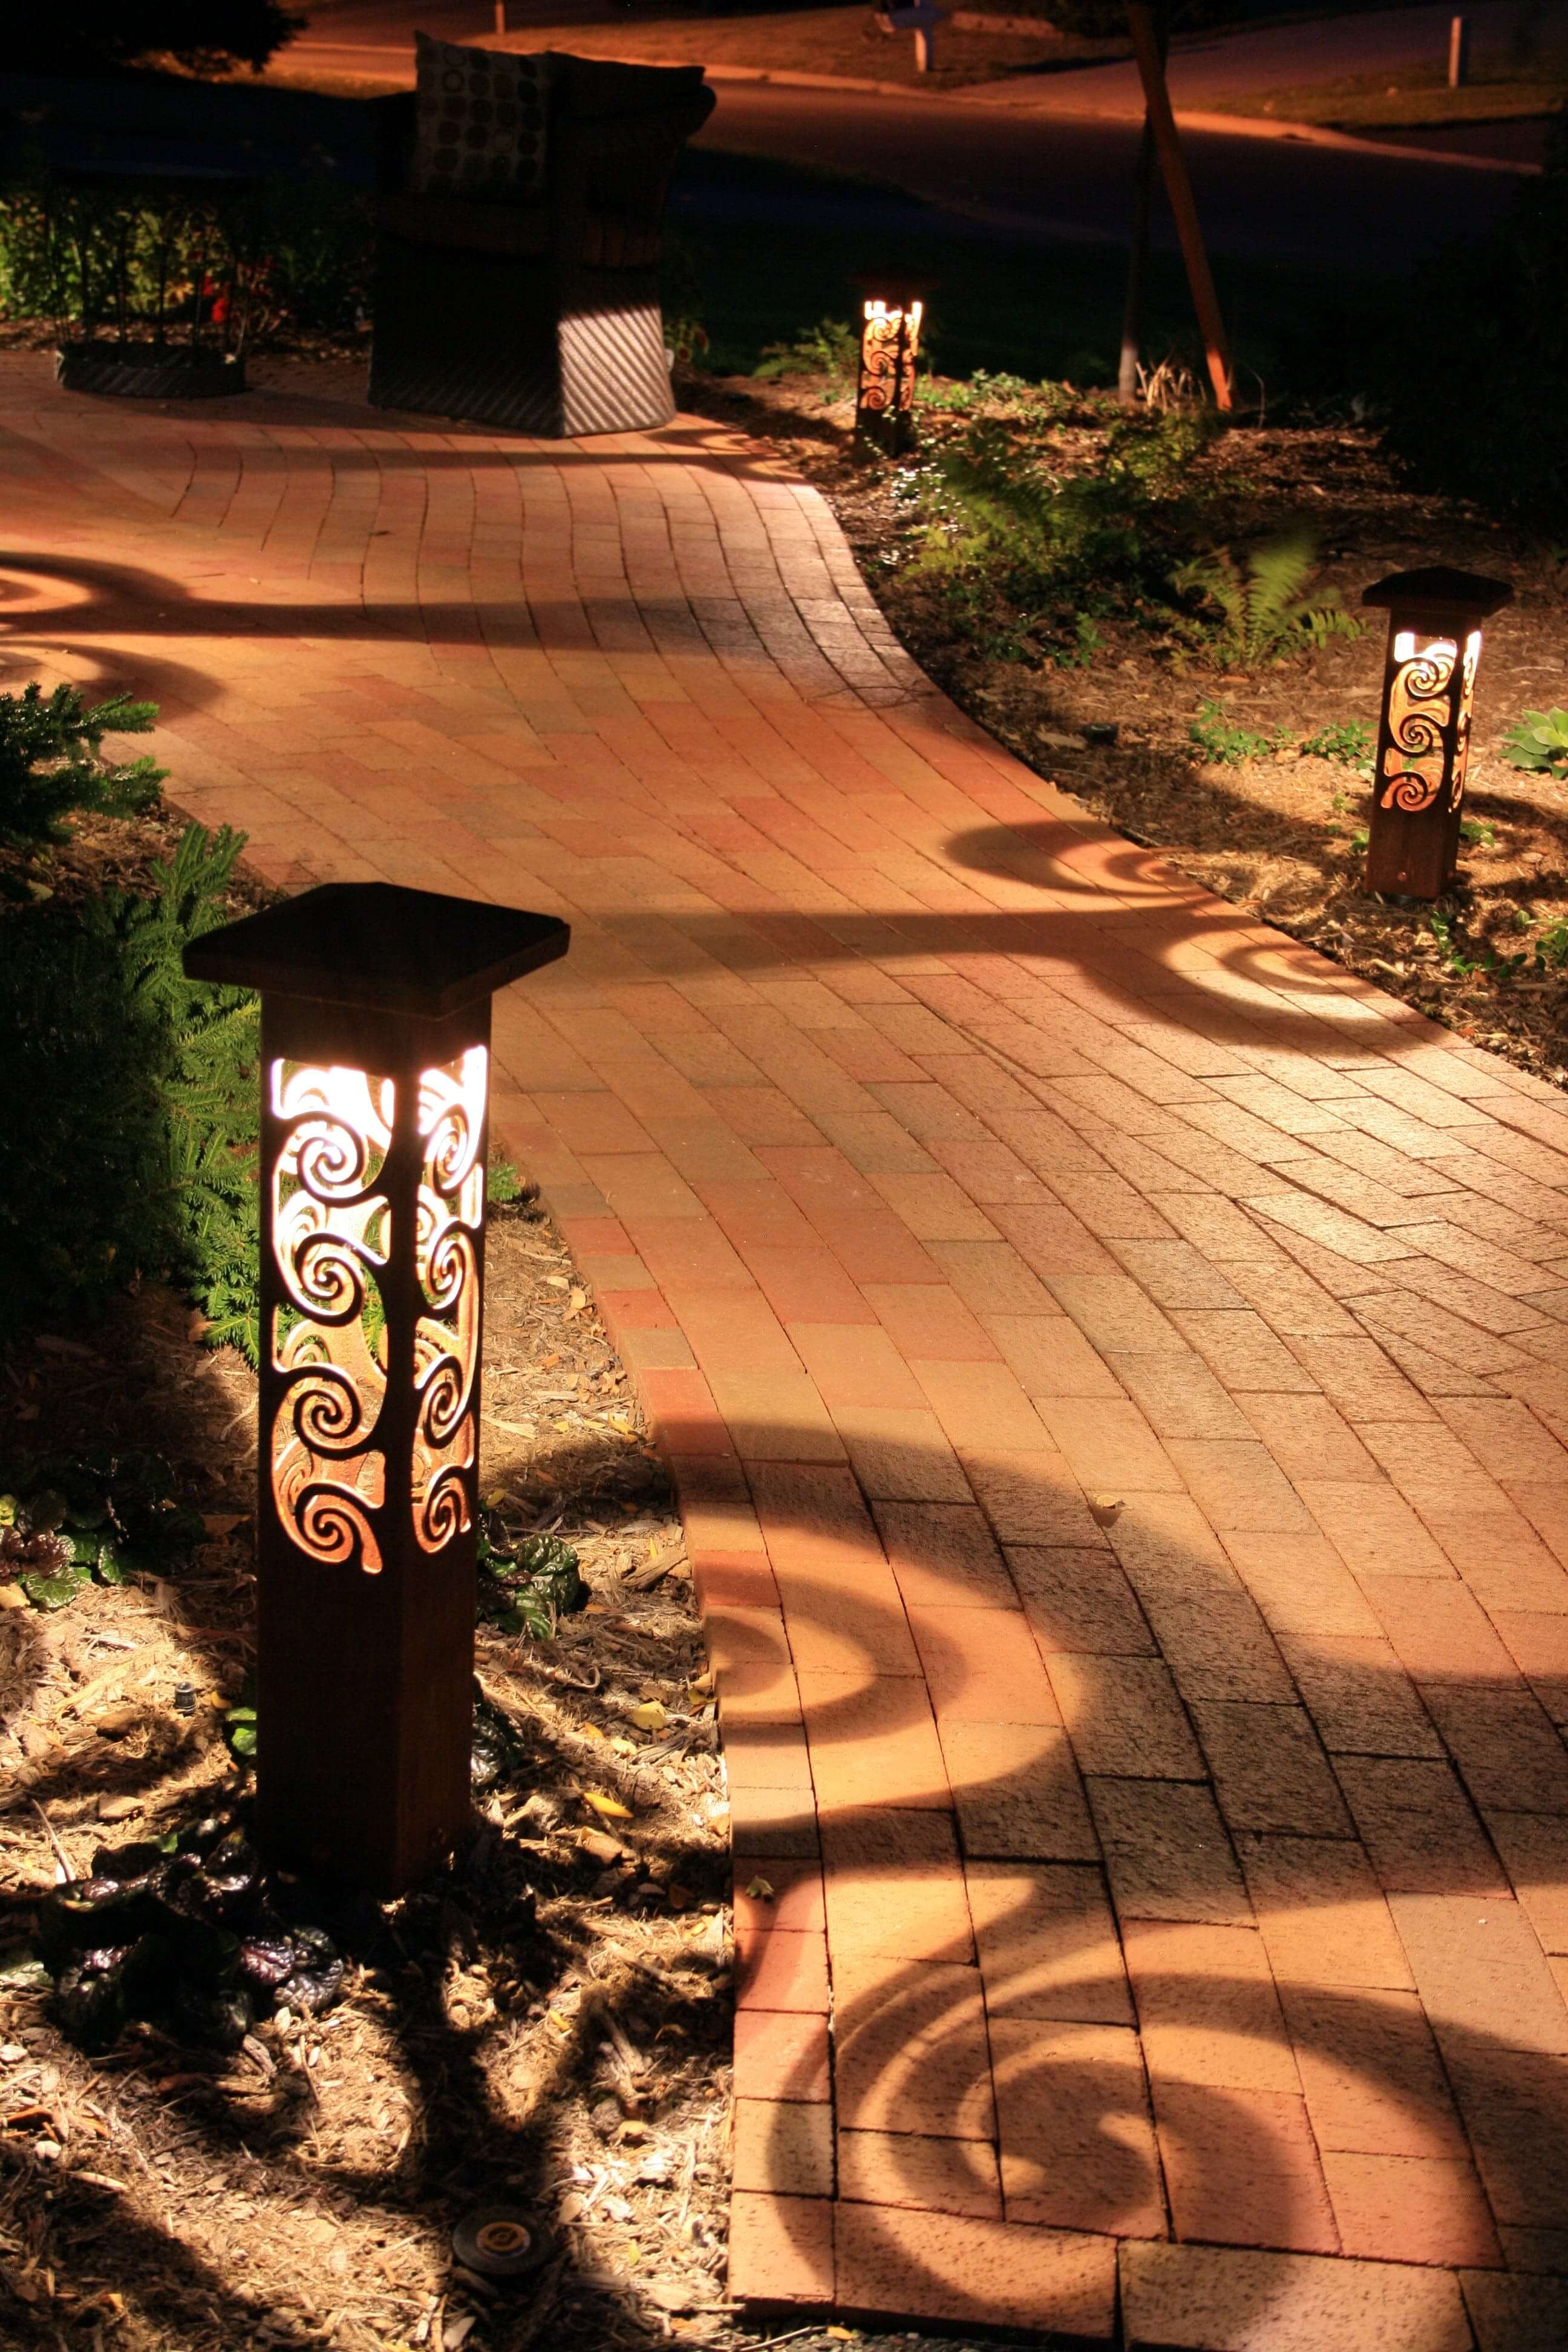 Specialty path lights on walkway